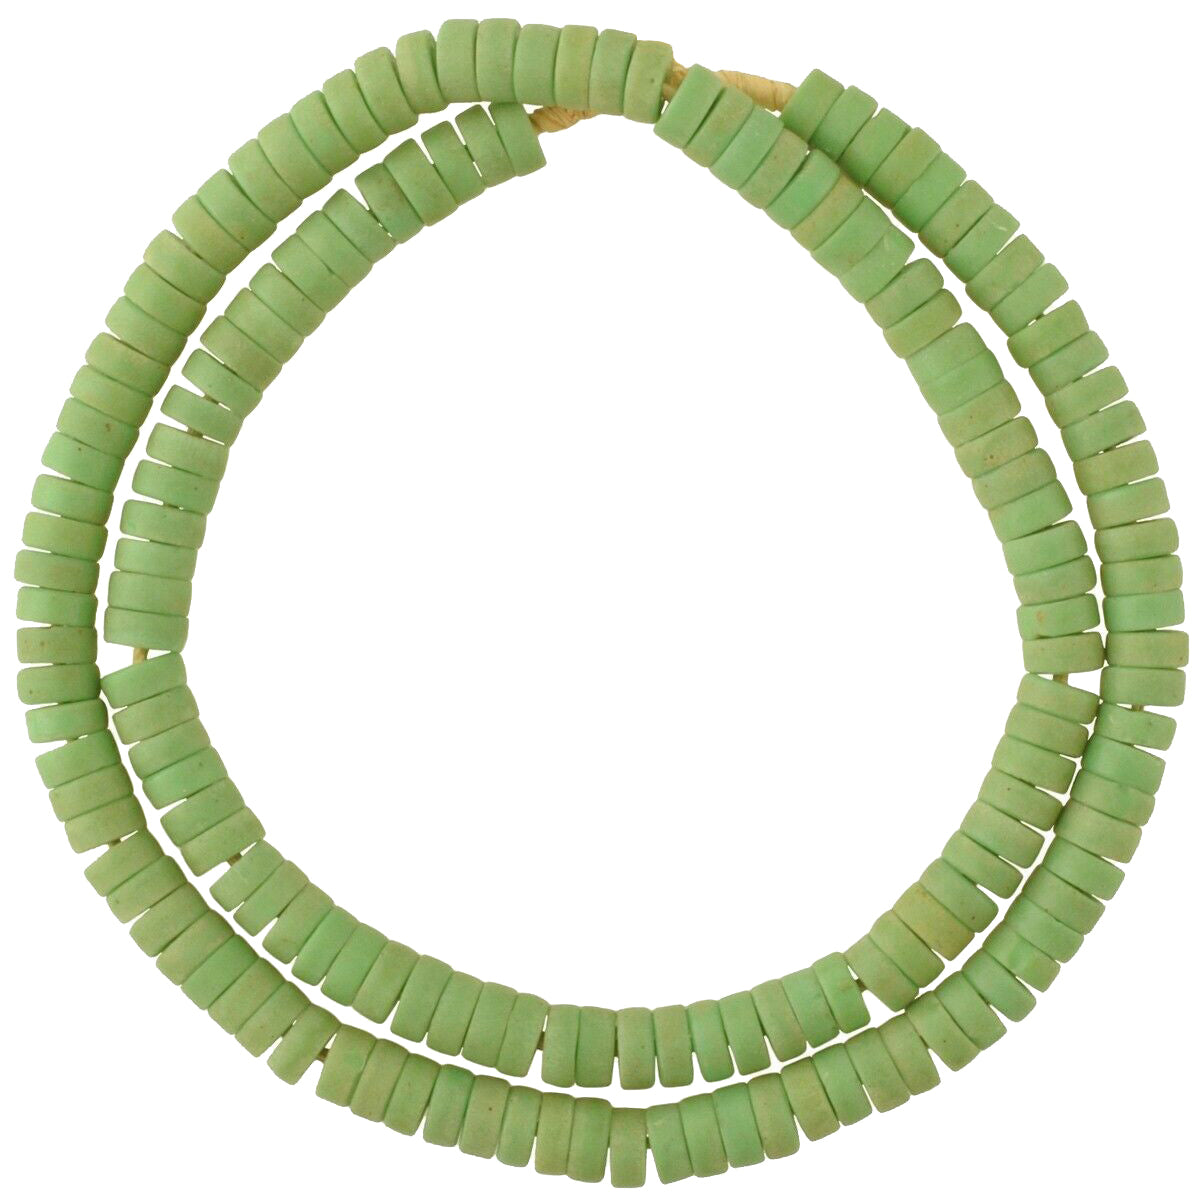 African trade beads green disks old Czech Bohemian glass beads spacers necklace - Tribalgh